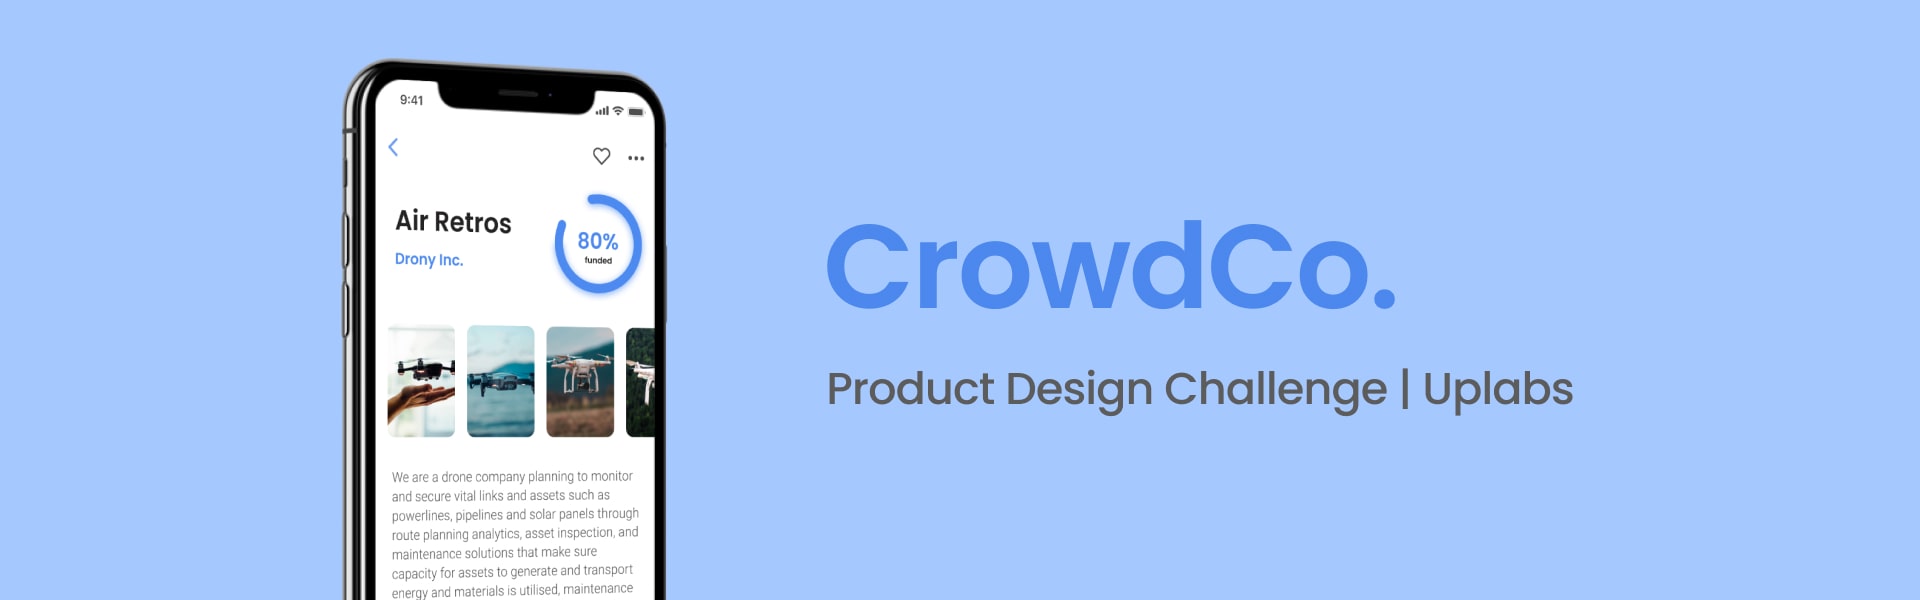 CrowdCo - Featured image